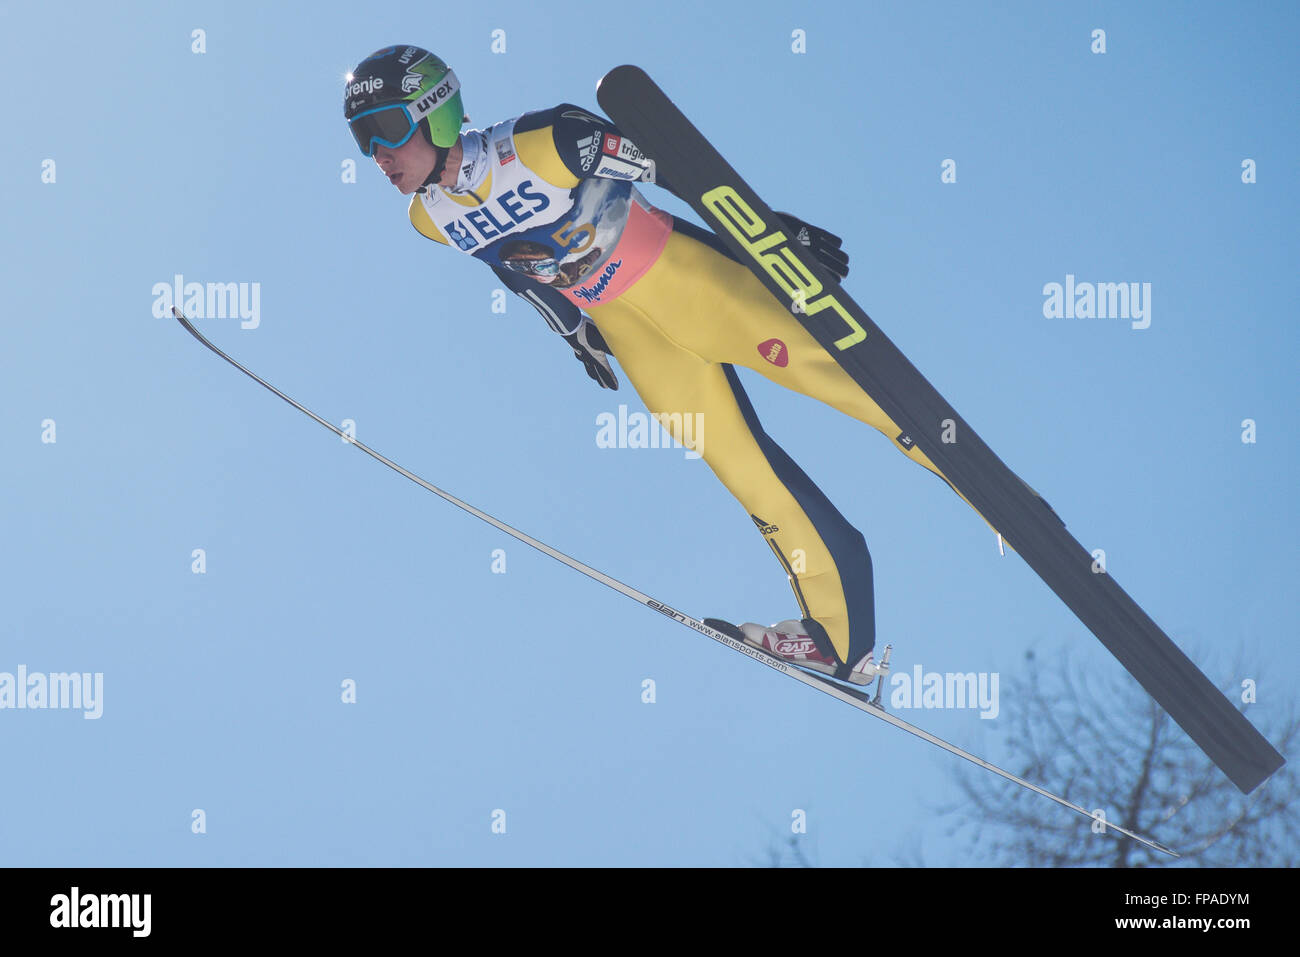 Rok Justin of Slovenia competes during Planica FIS Ski Jumping World Cup finals on the March 18, 2016 in Planica, Slovenia. (Photo by Rok Rakun/Pacific Press) Stock Photo